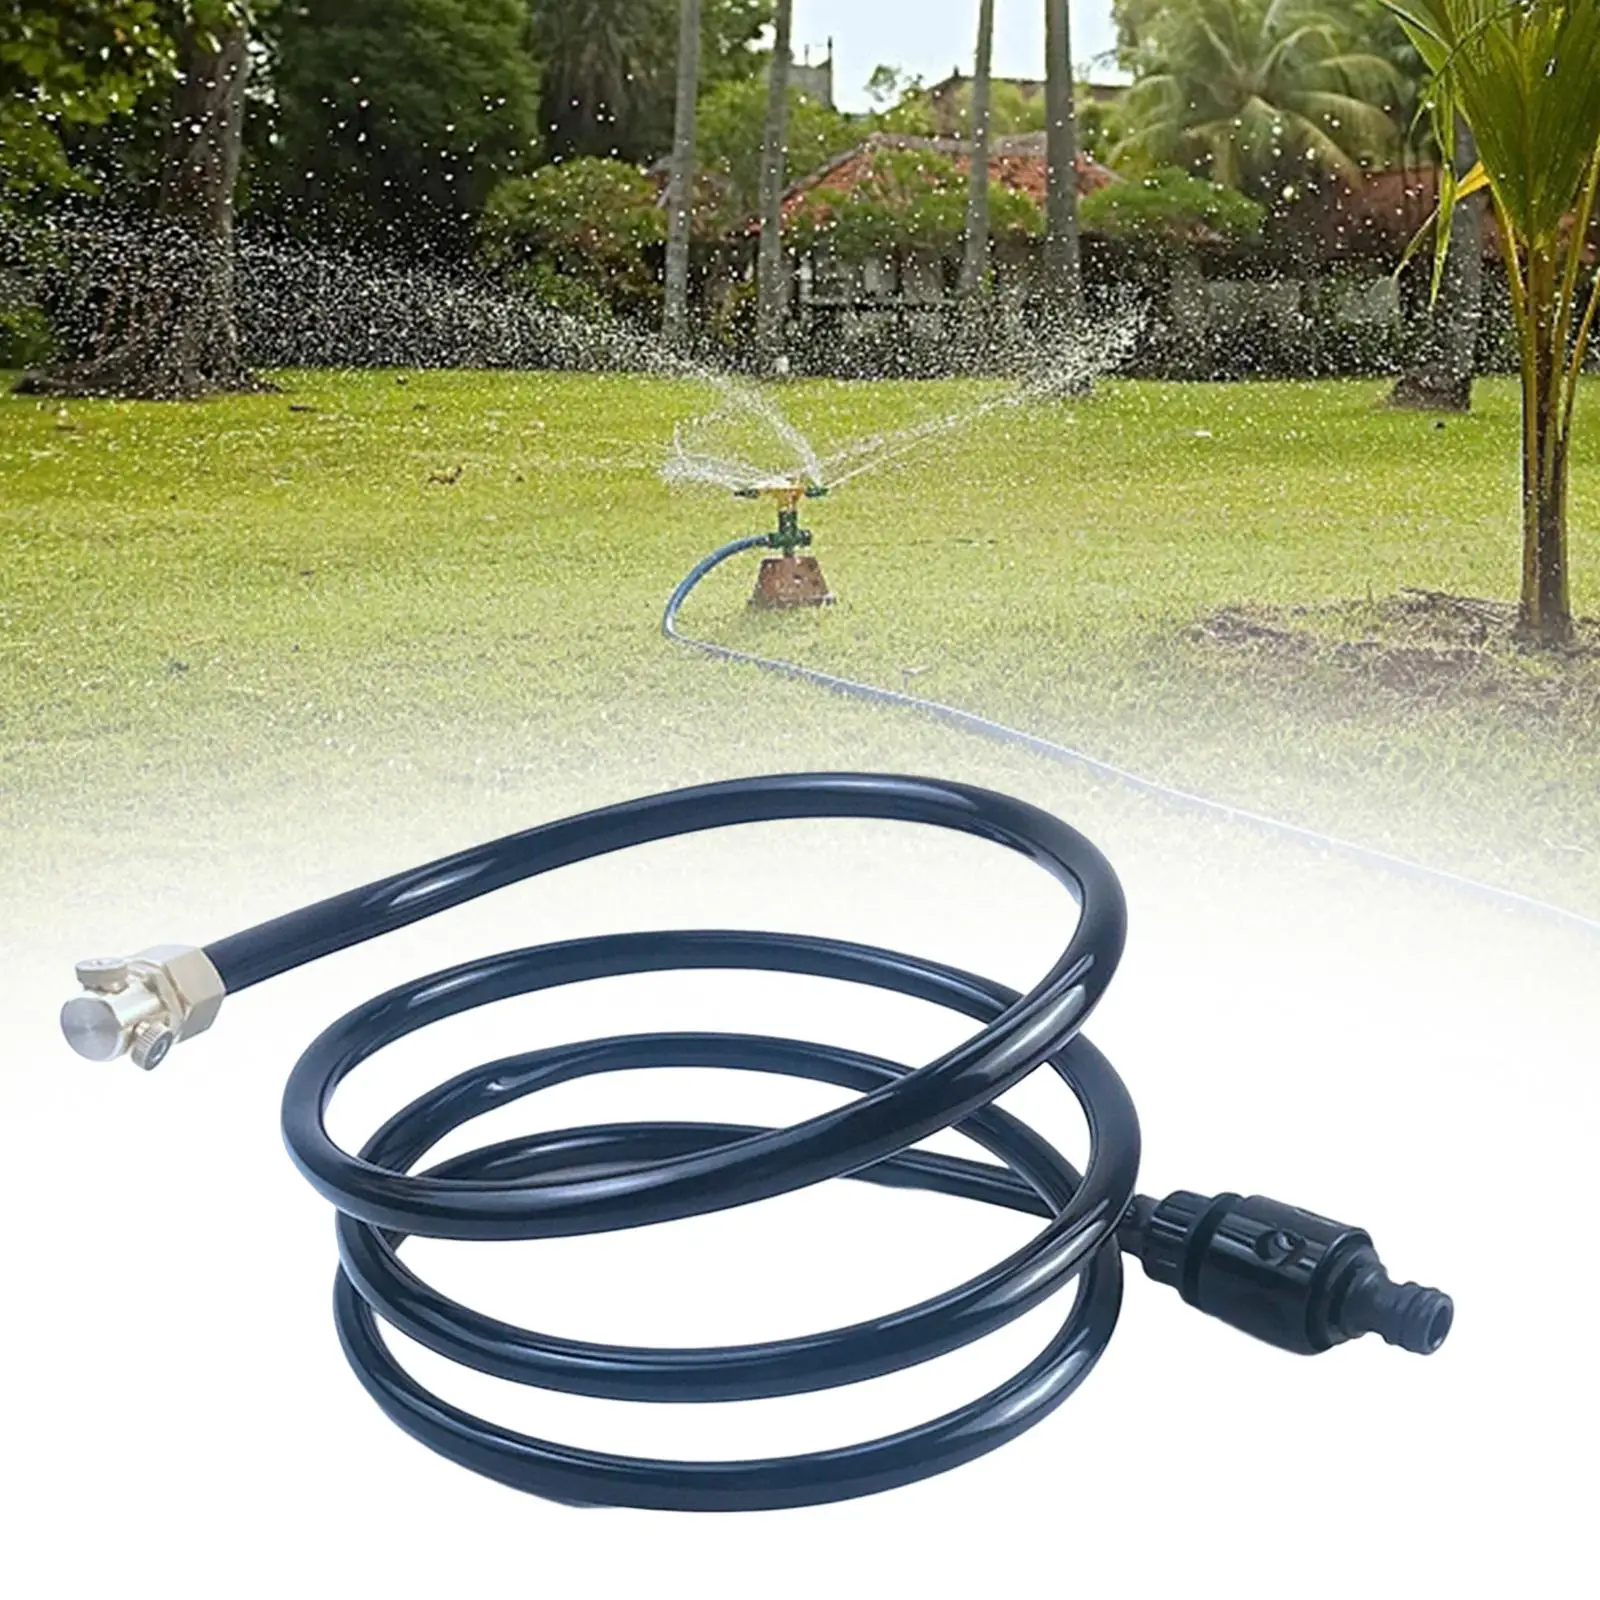 Water Patio Mist Sprayer Hose Irrigation Hose for Outdoor Cooling, Patio,